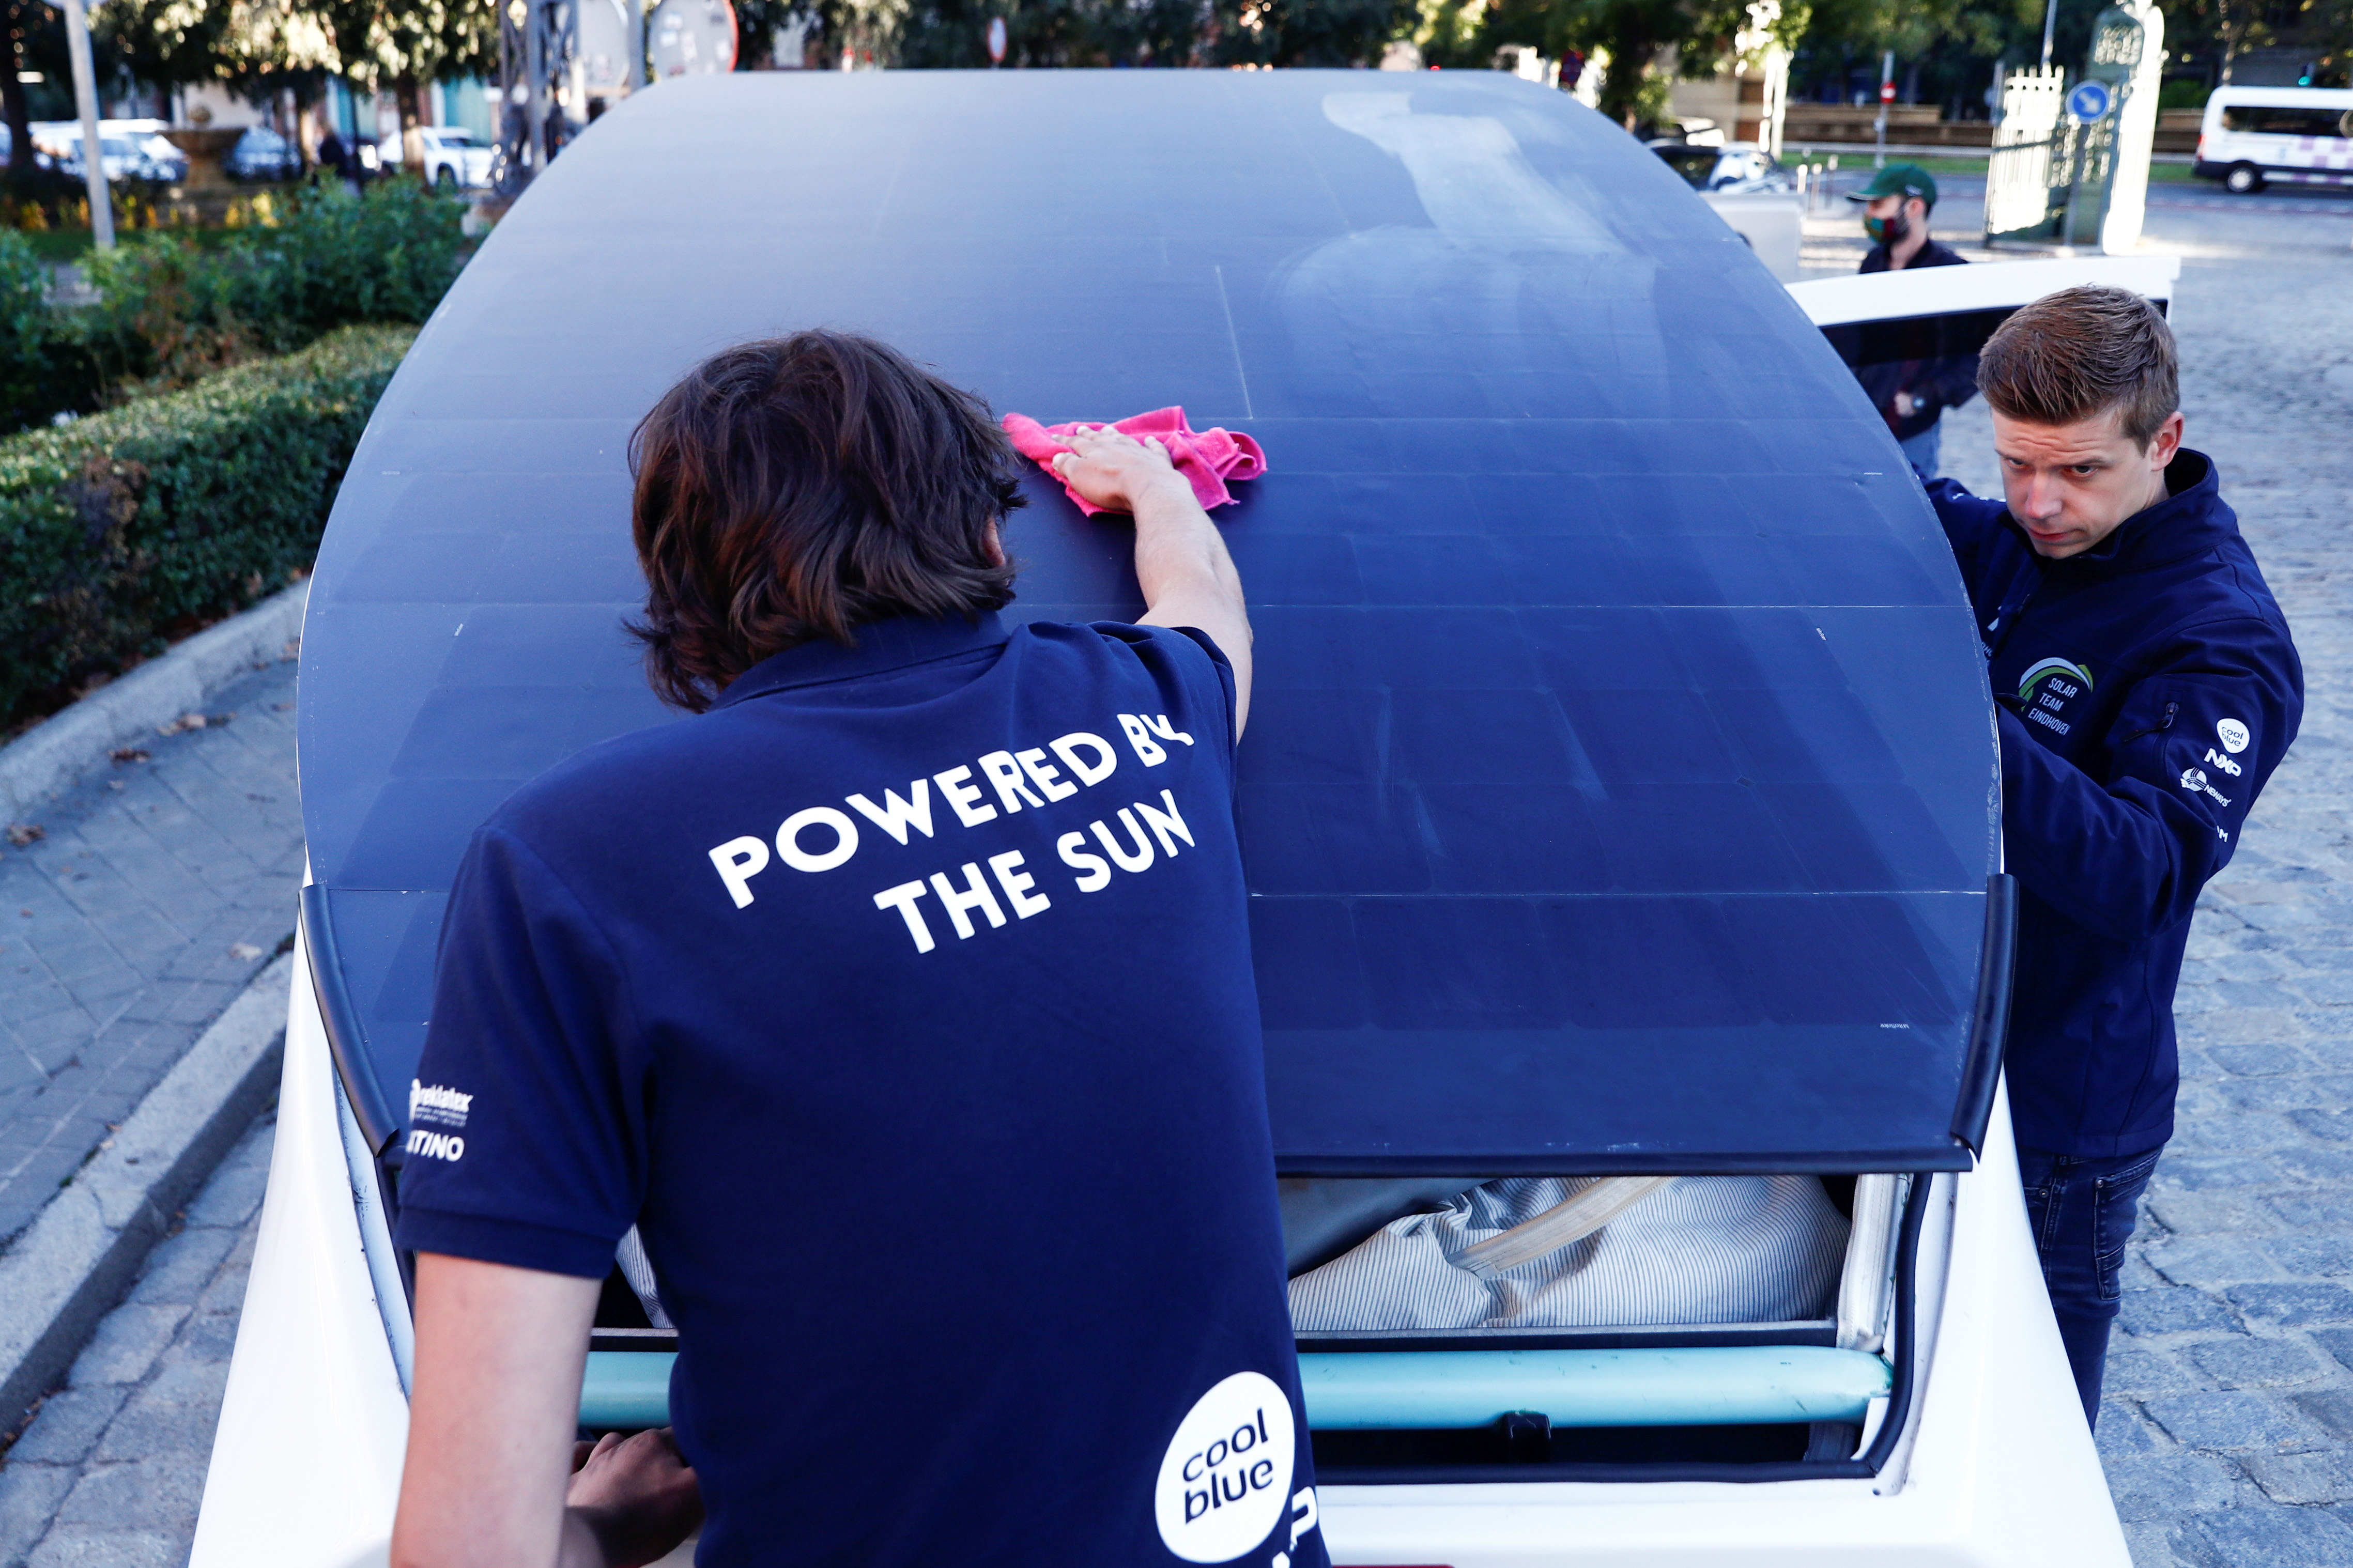 A student from Eindhoven's Technical University cleans Stella Vita vehicle in Spain